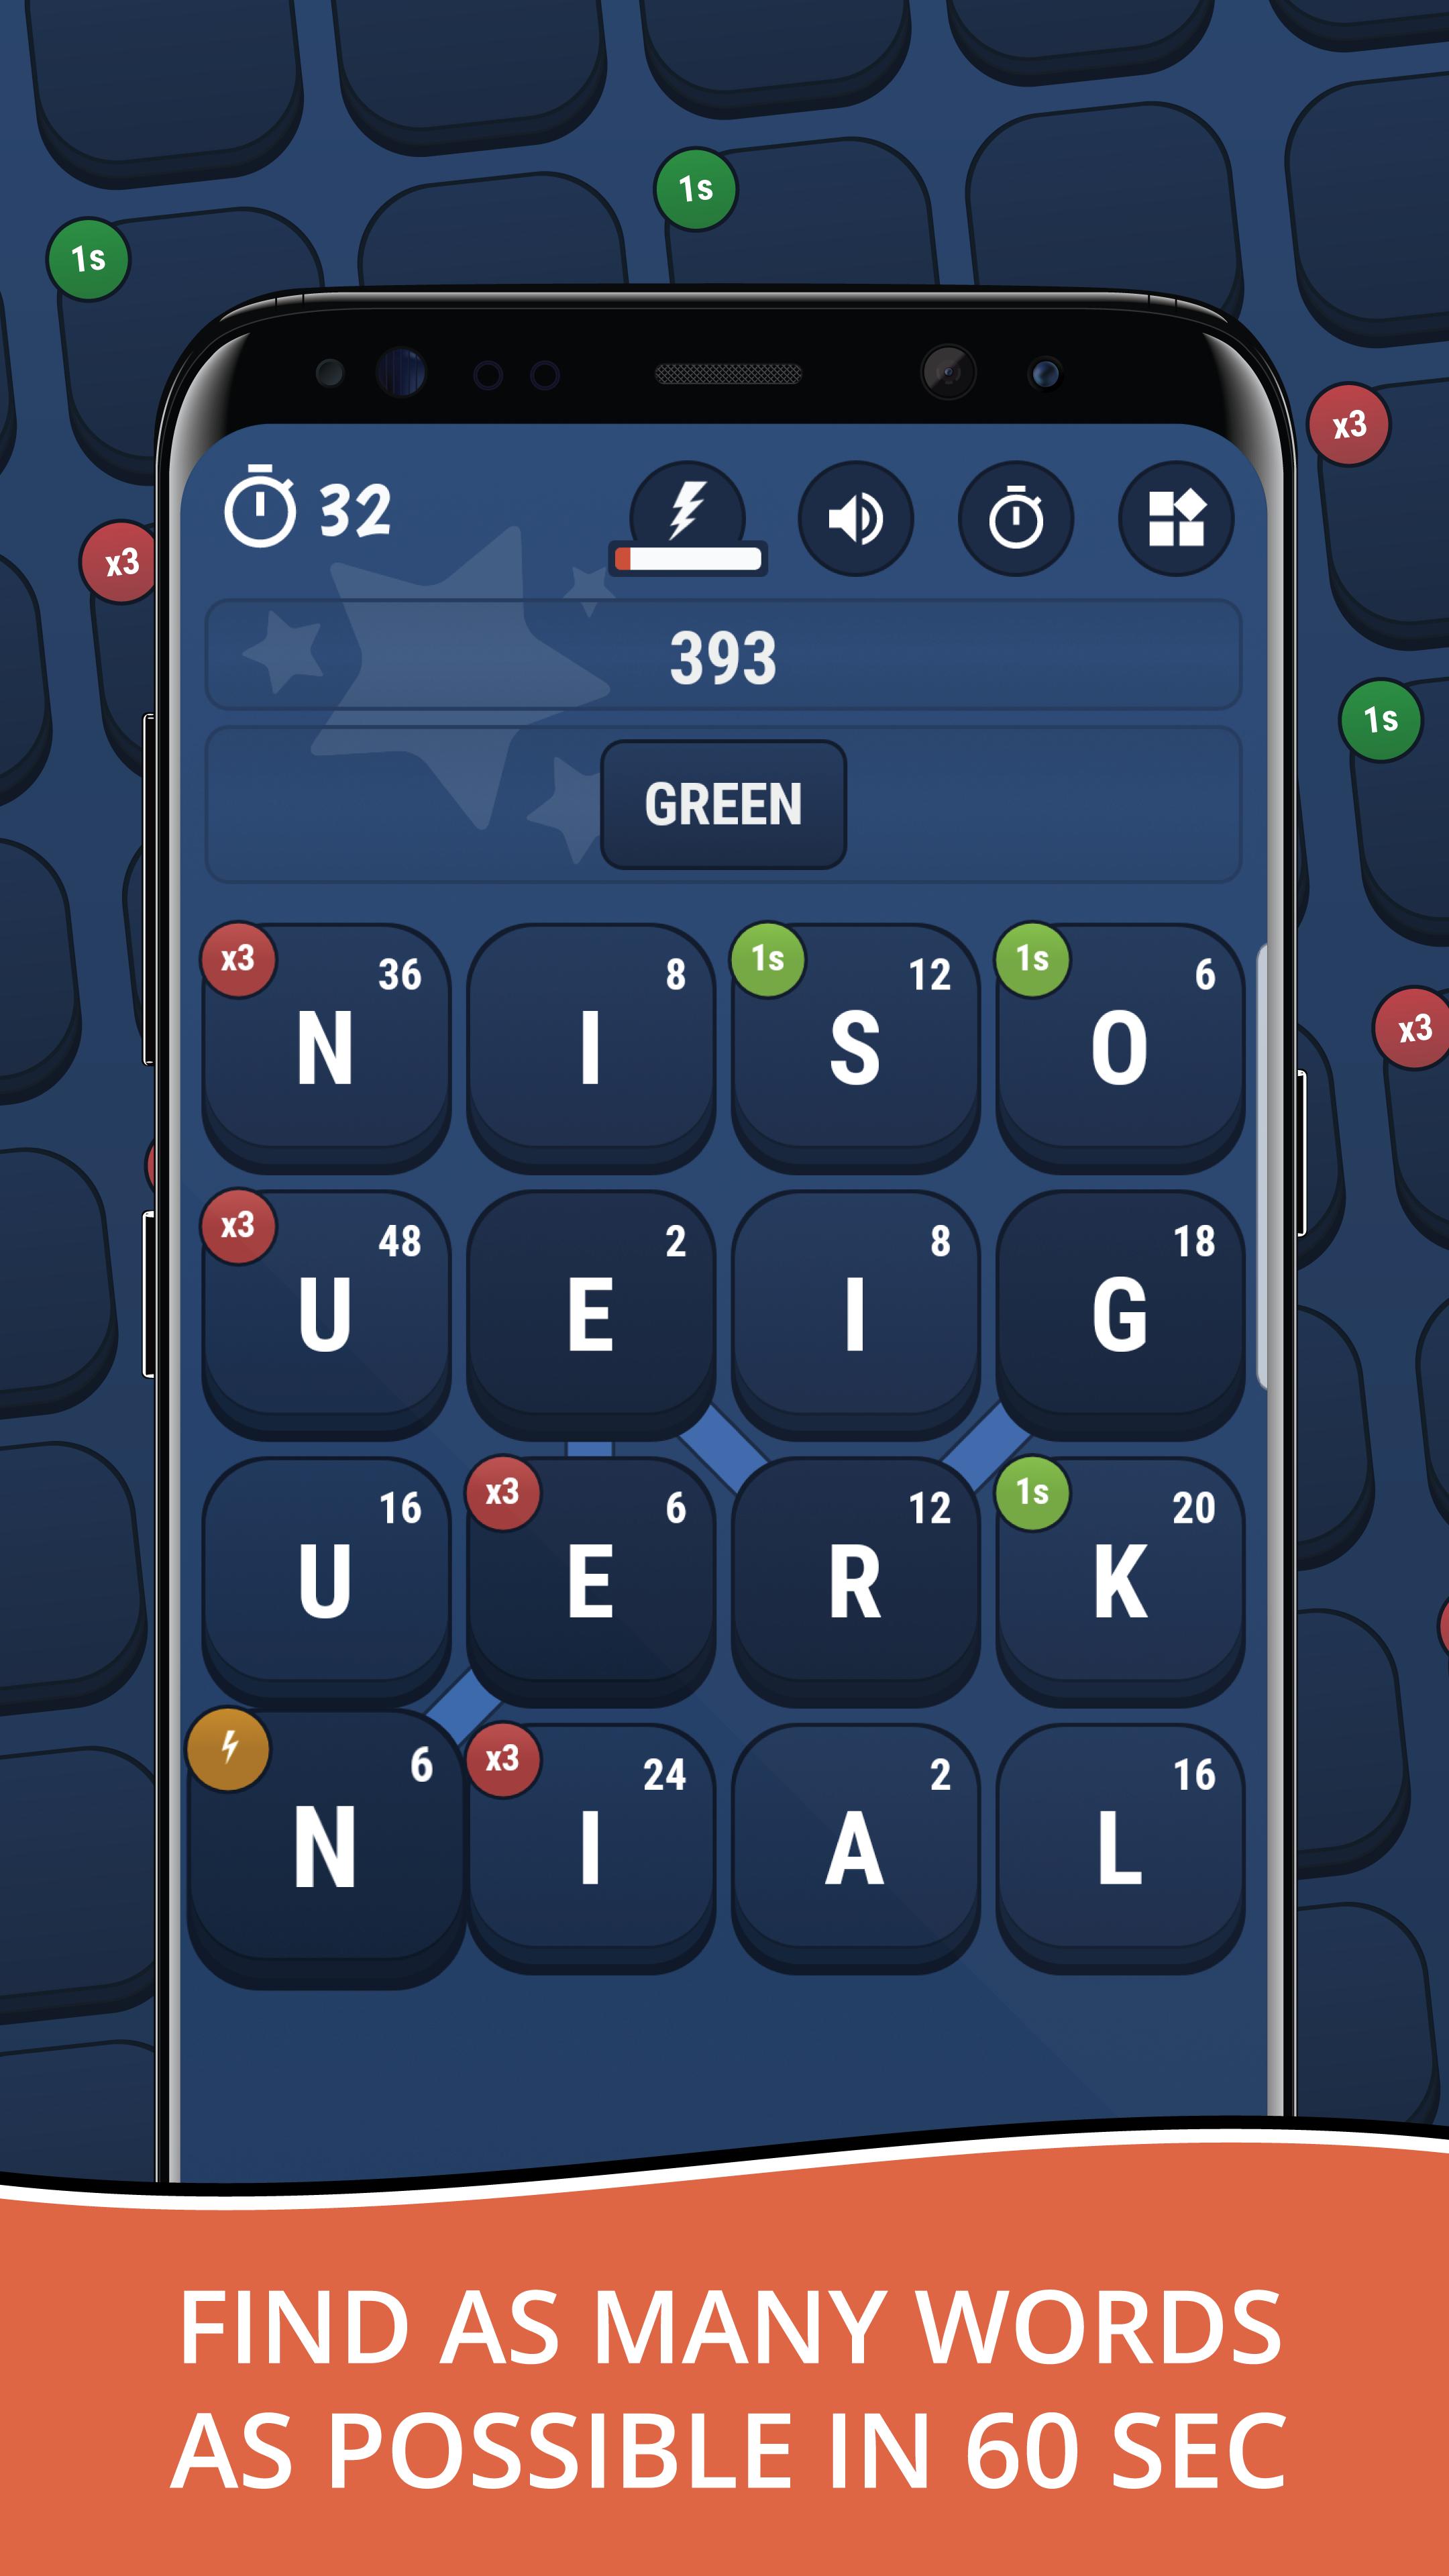 BattleWords Premium: fast-pace Latest Version 2.8.3 for Android